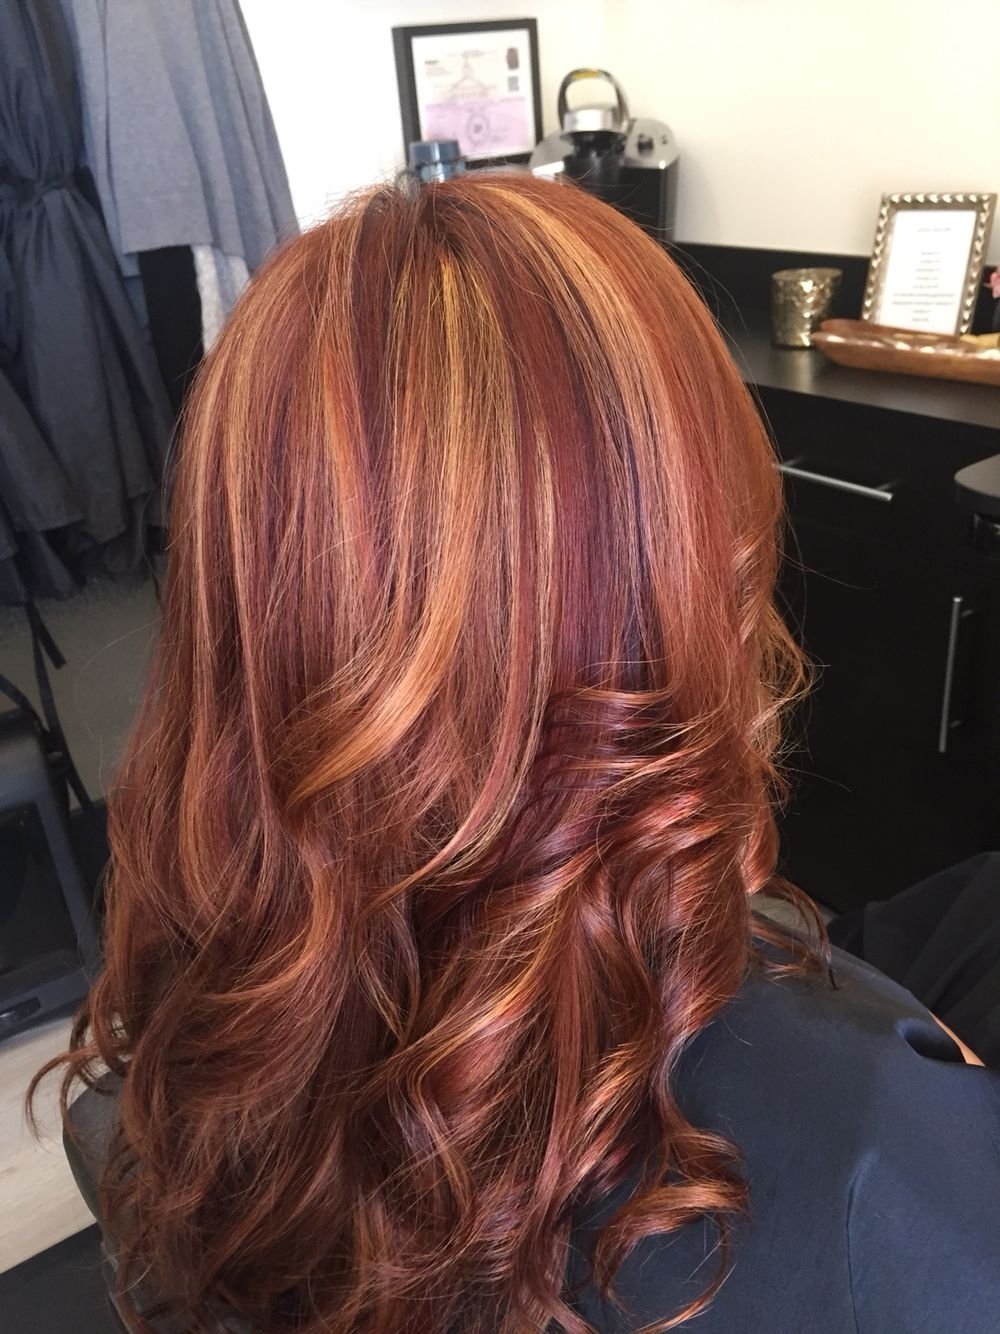 10 Attractive Red Hair Color Ideas With Highlights pinjoanahairwedding on hair color ideas pinterest ethnic 2023